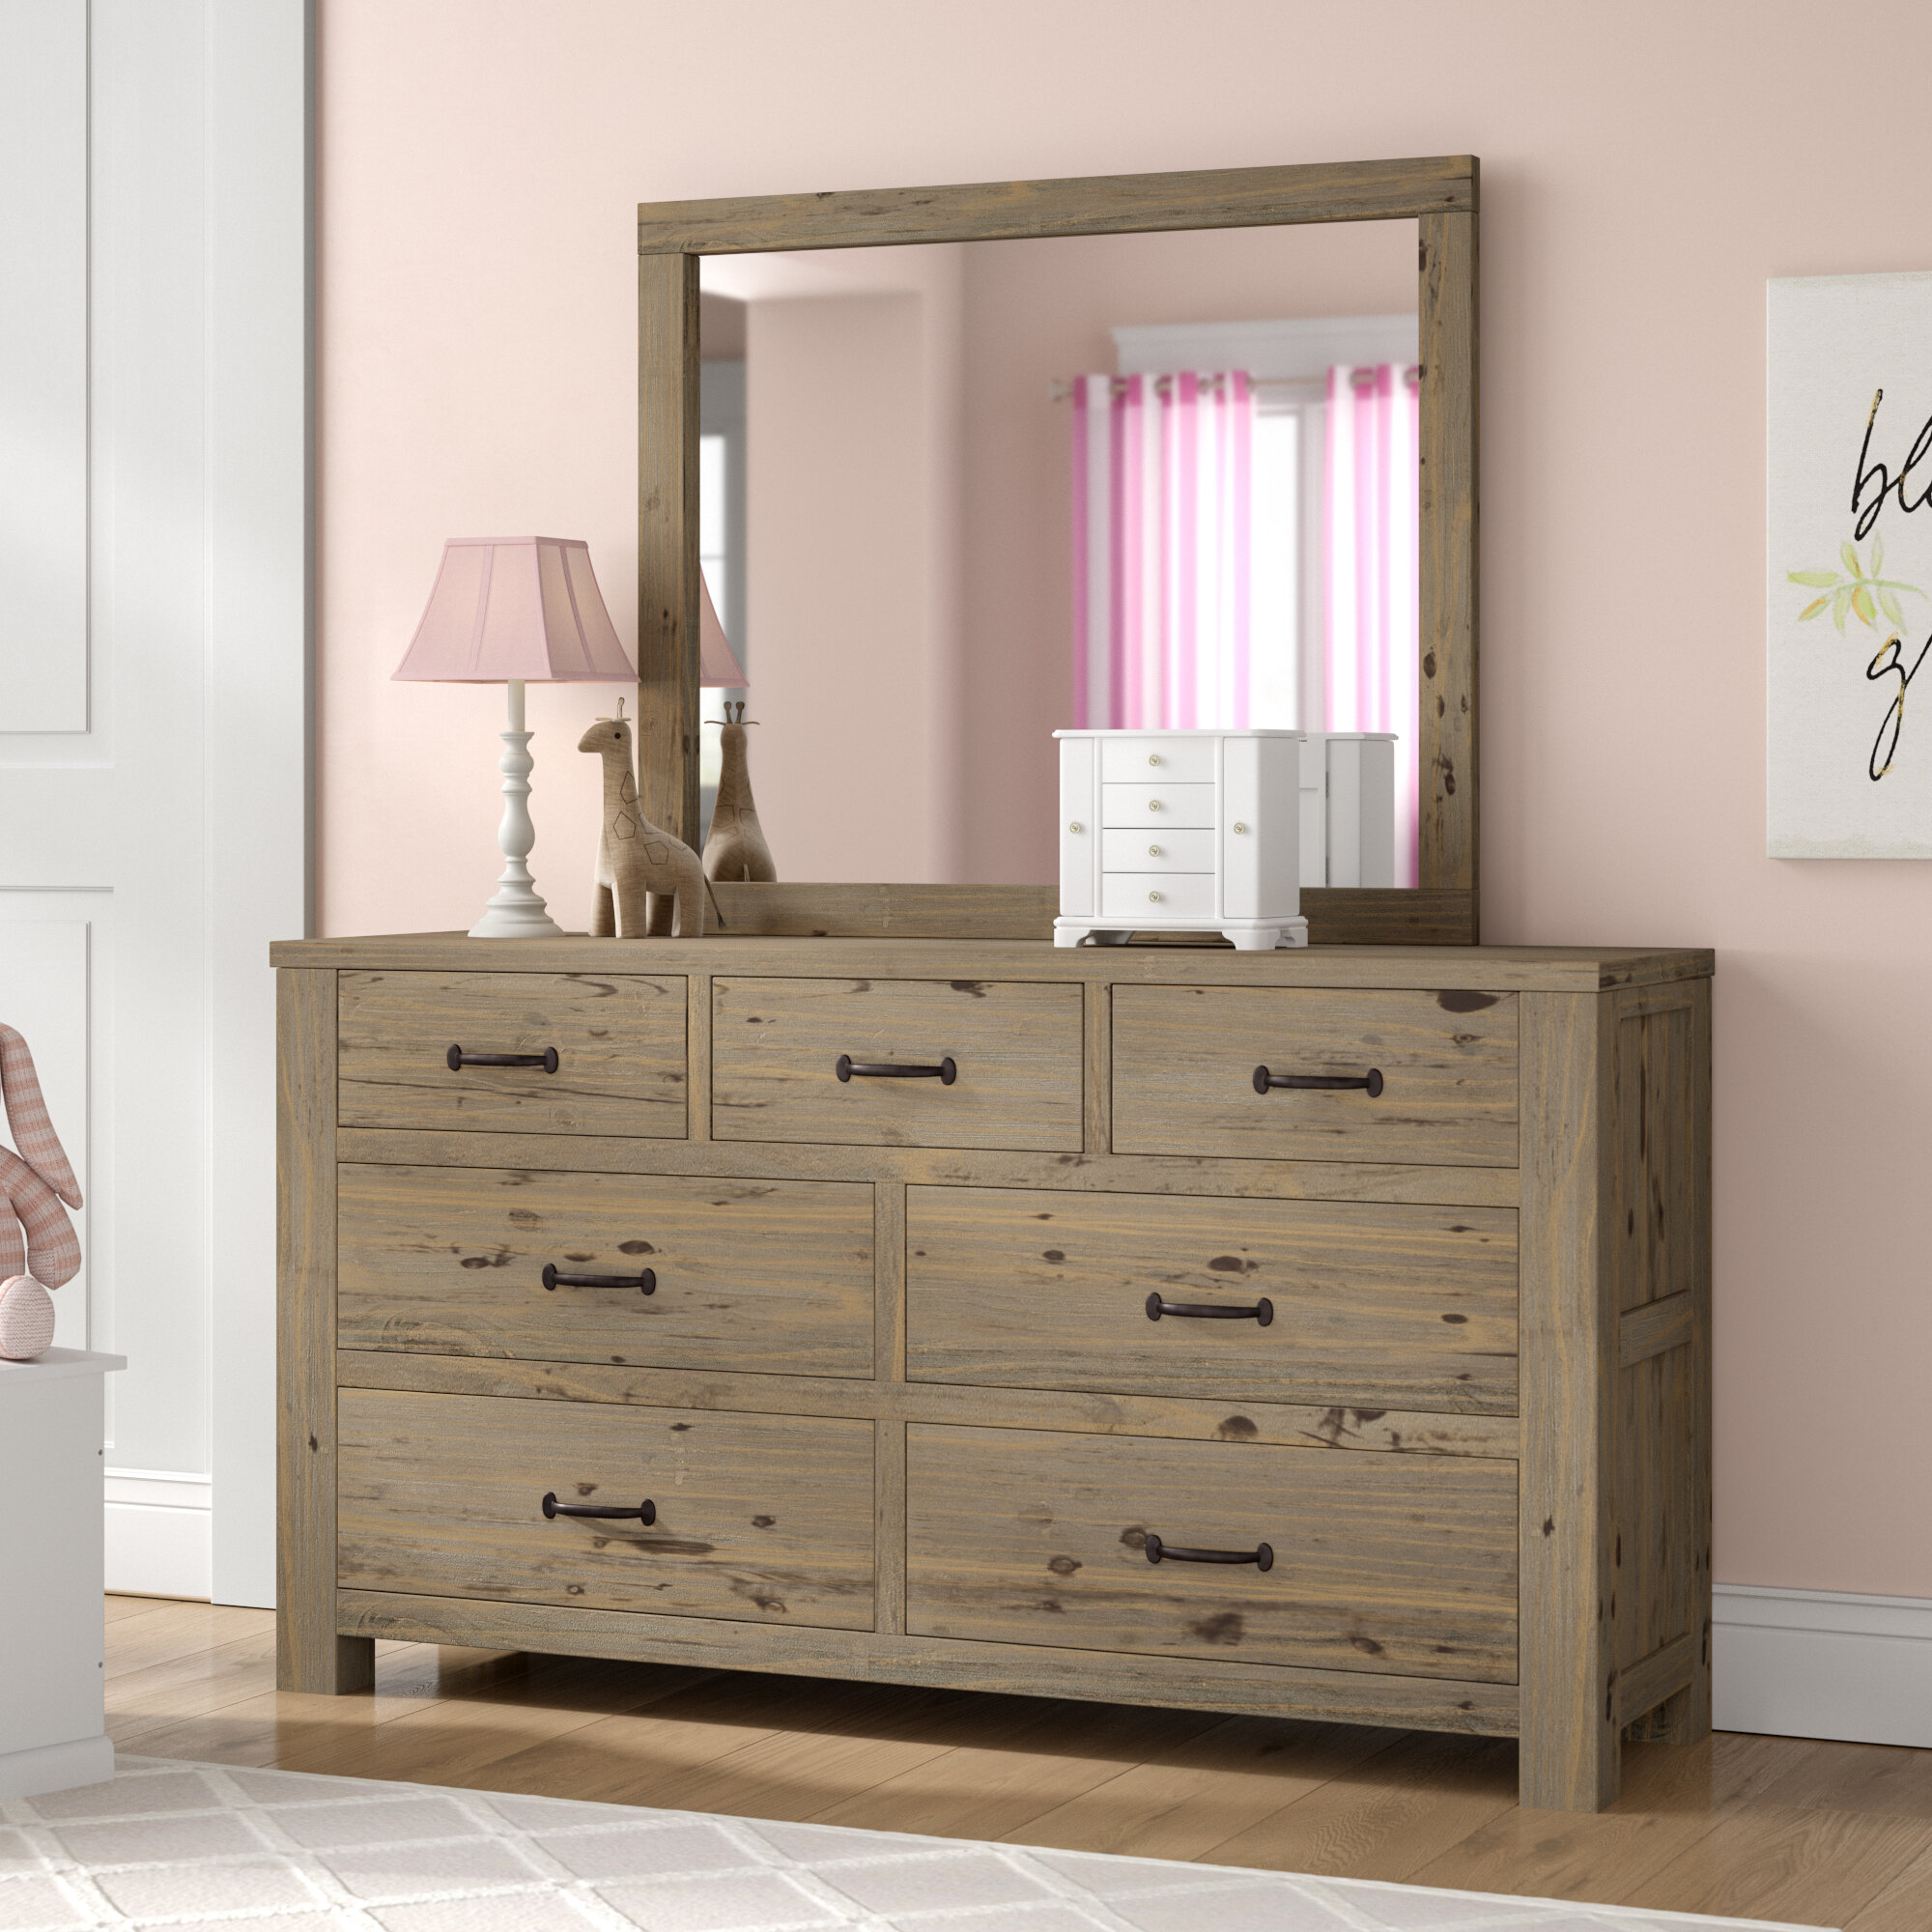 Greyleigh Bedlington 7 Drawer Solid Wood Double Dresser With